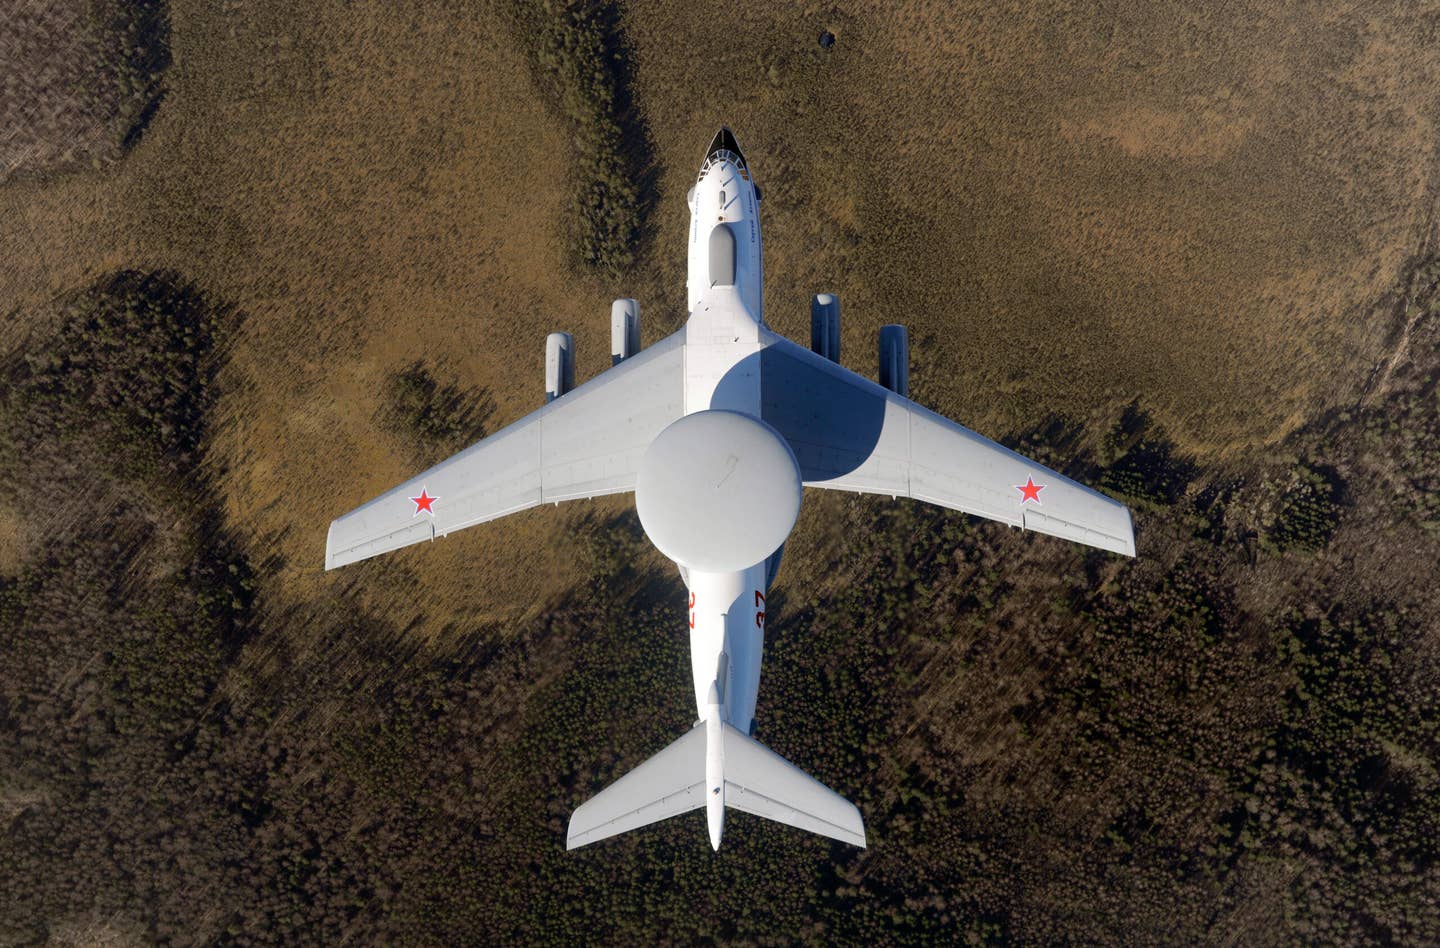 A Beriev A-50 Mainstay airborne early warning and control (AEW&amp;C) aircraft. <em>Photo by: aviation-images.com/Universal Images Group via Getty Images</em>